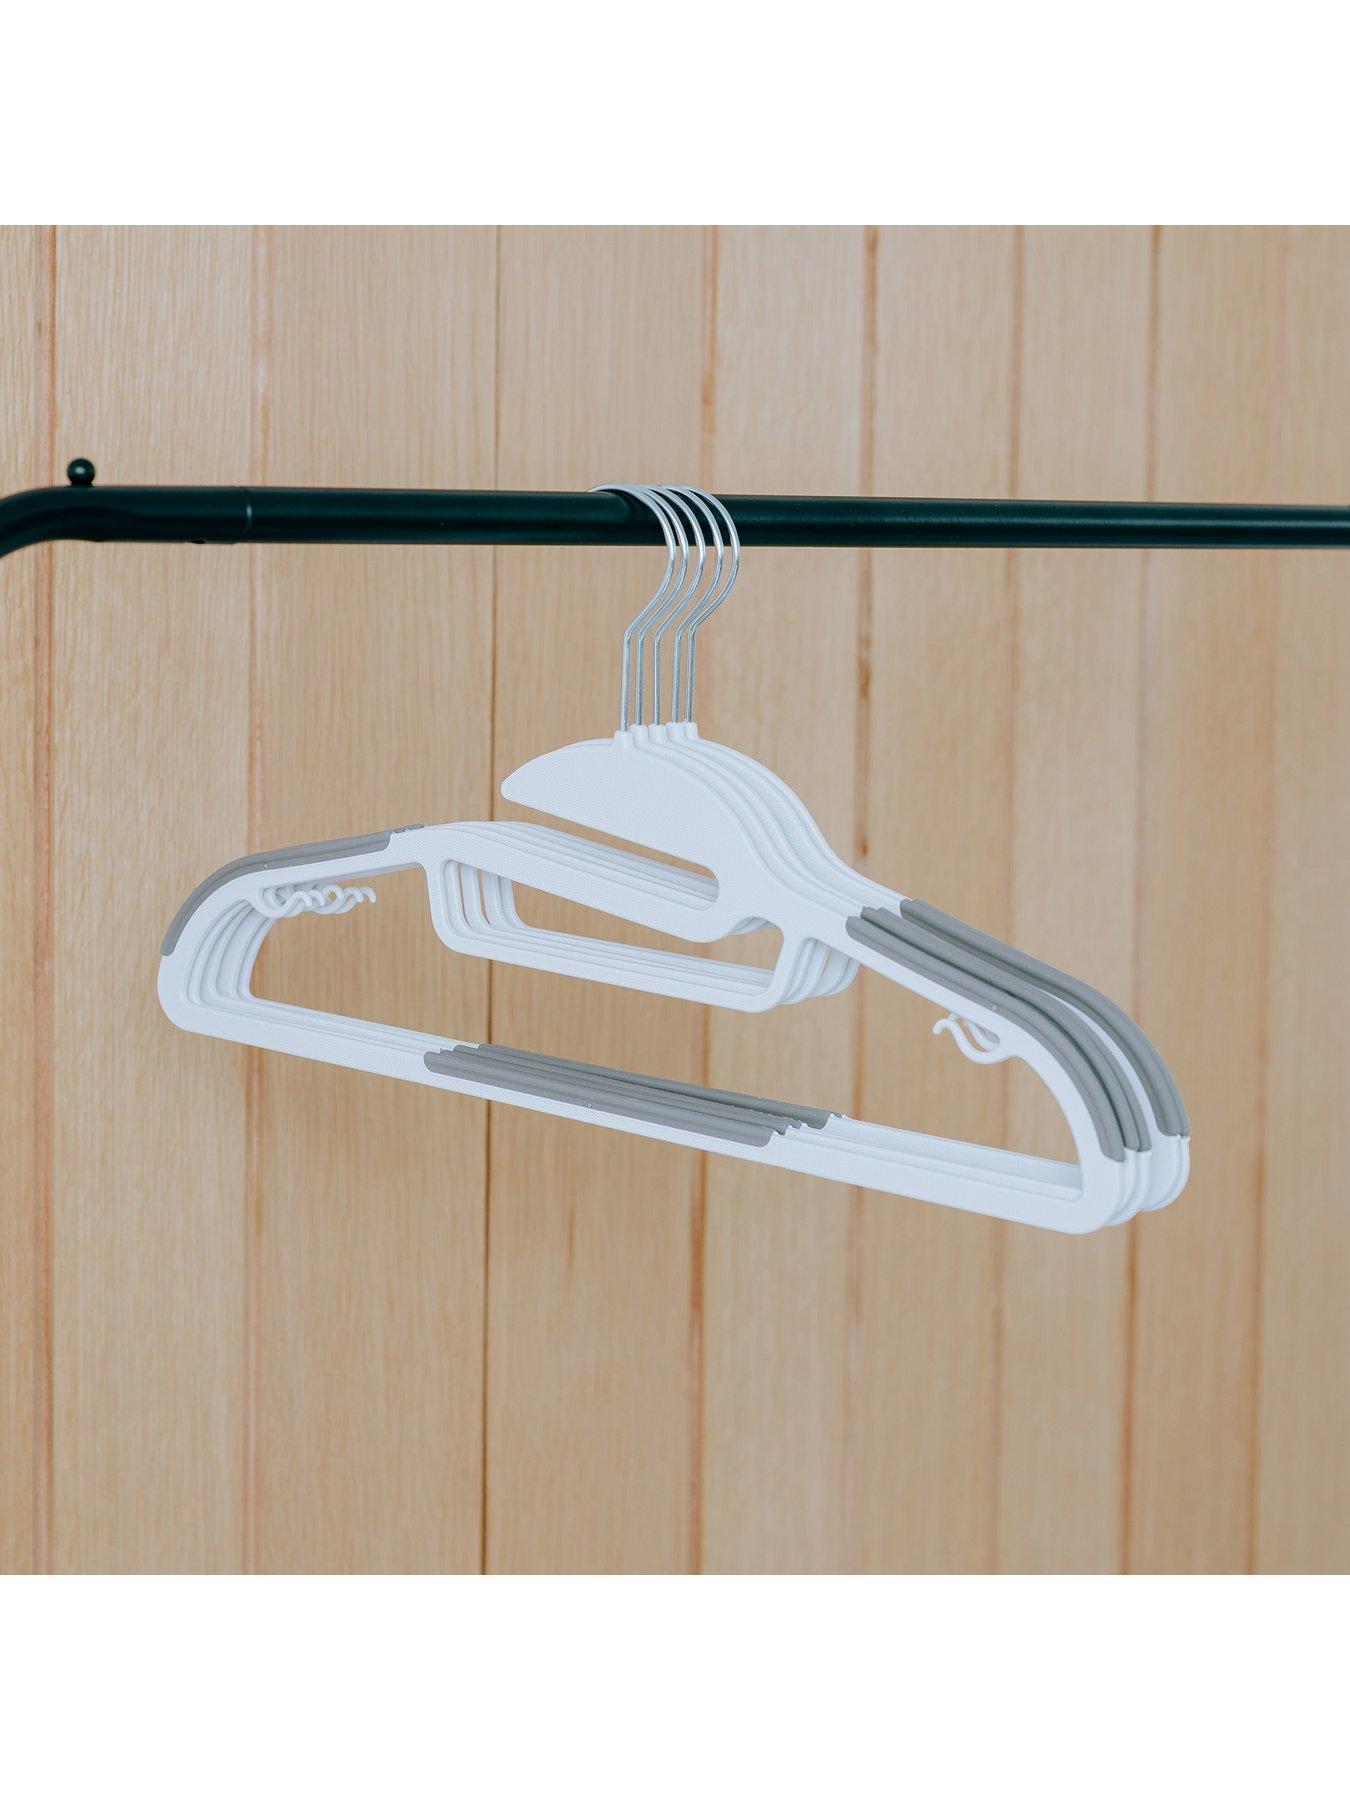 5 Pack Authentic Nike Grey Wood Hangers Non Slip Coating For Clothes Or  Display